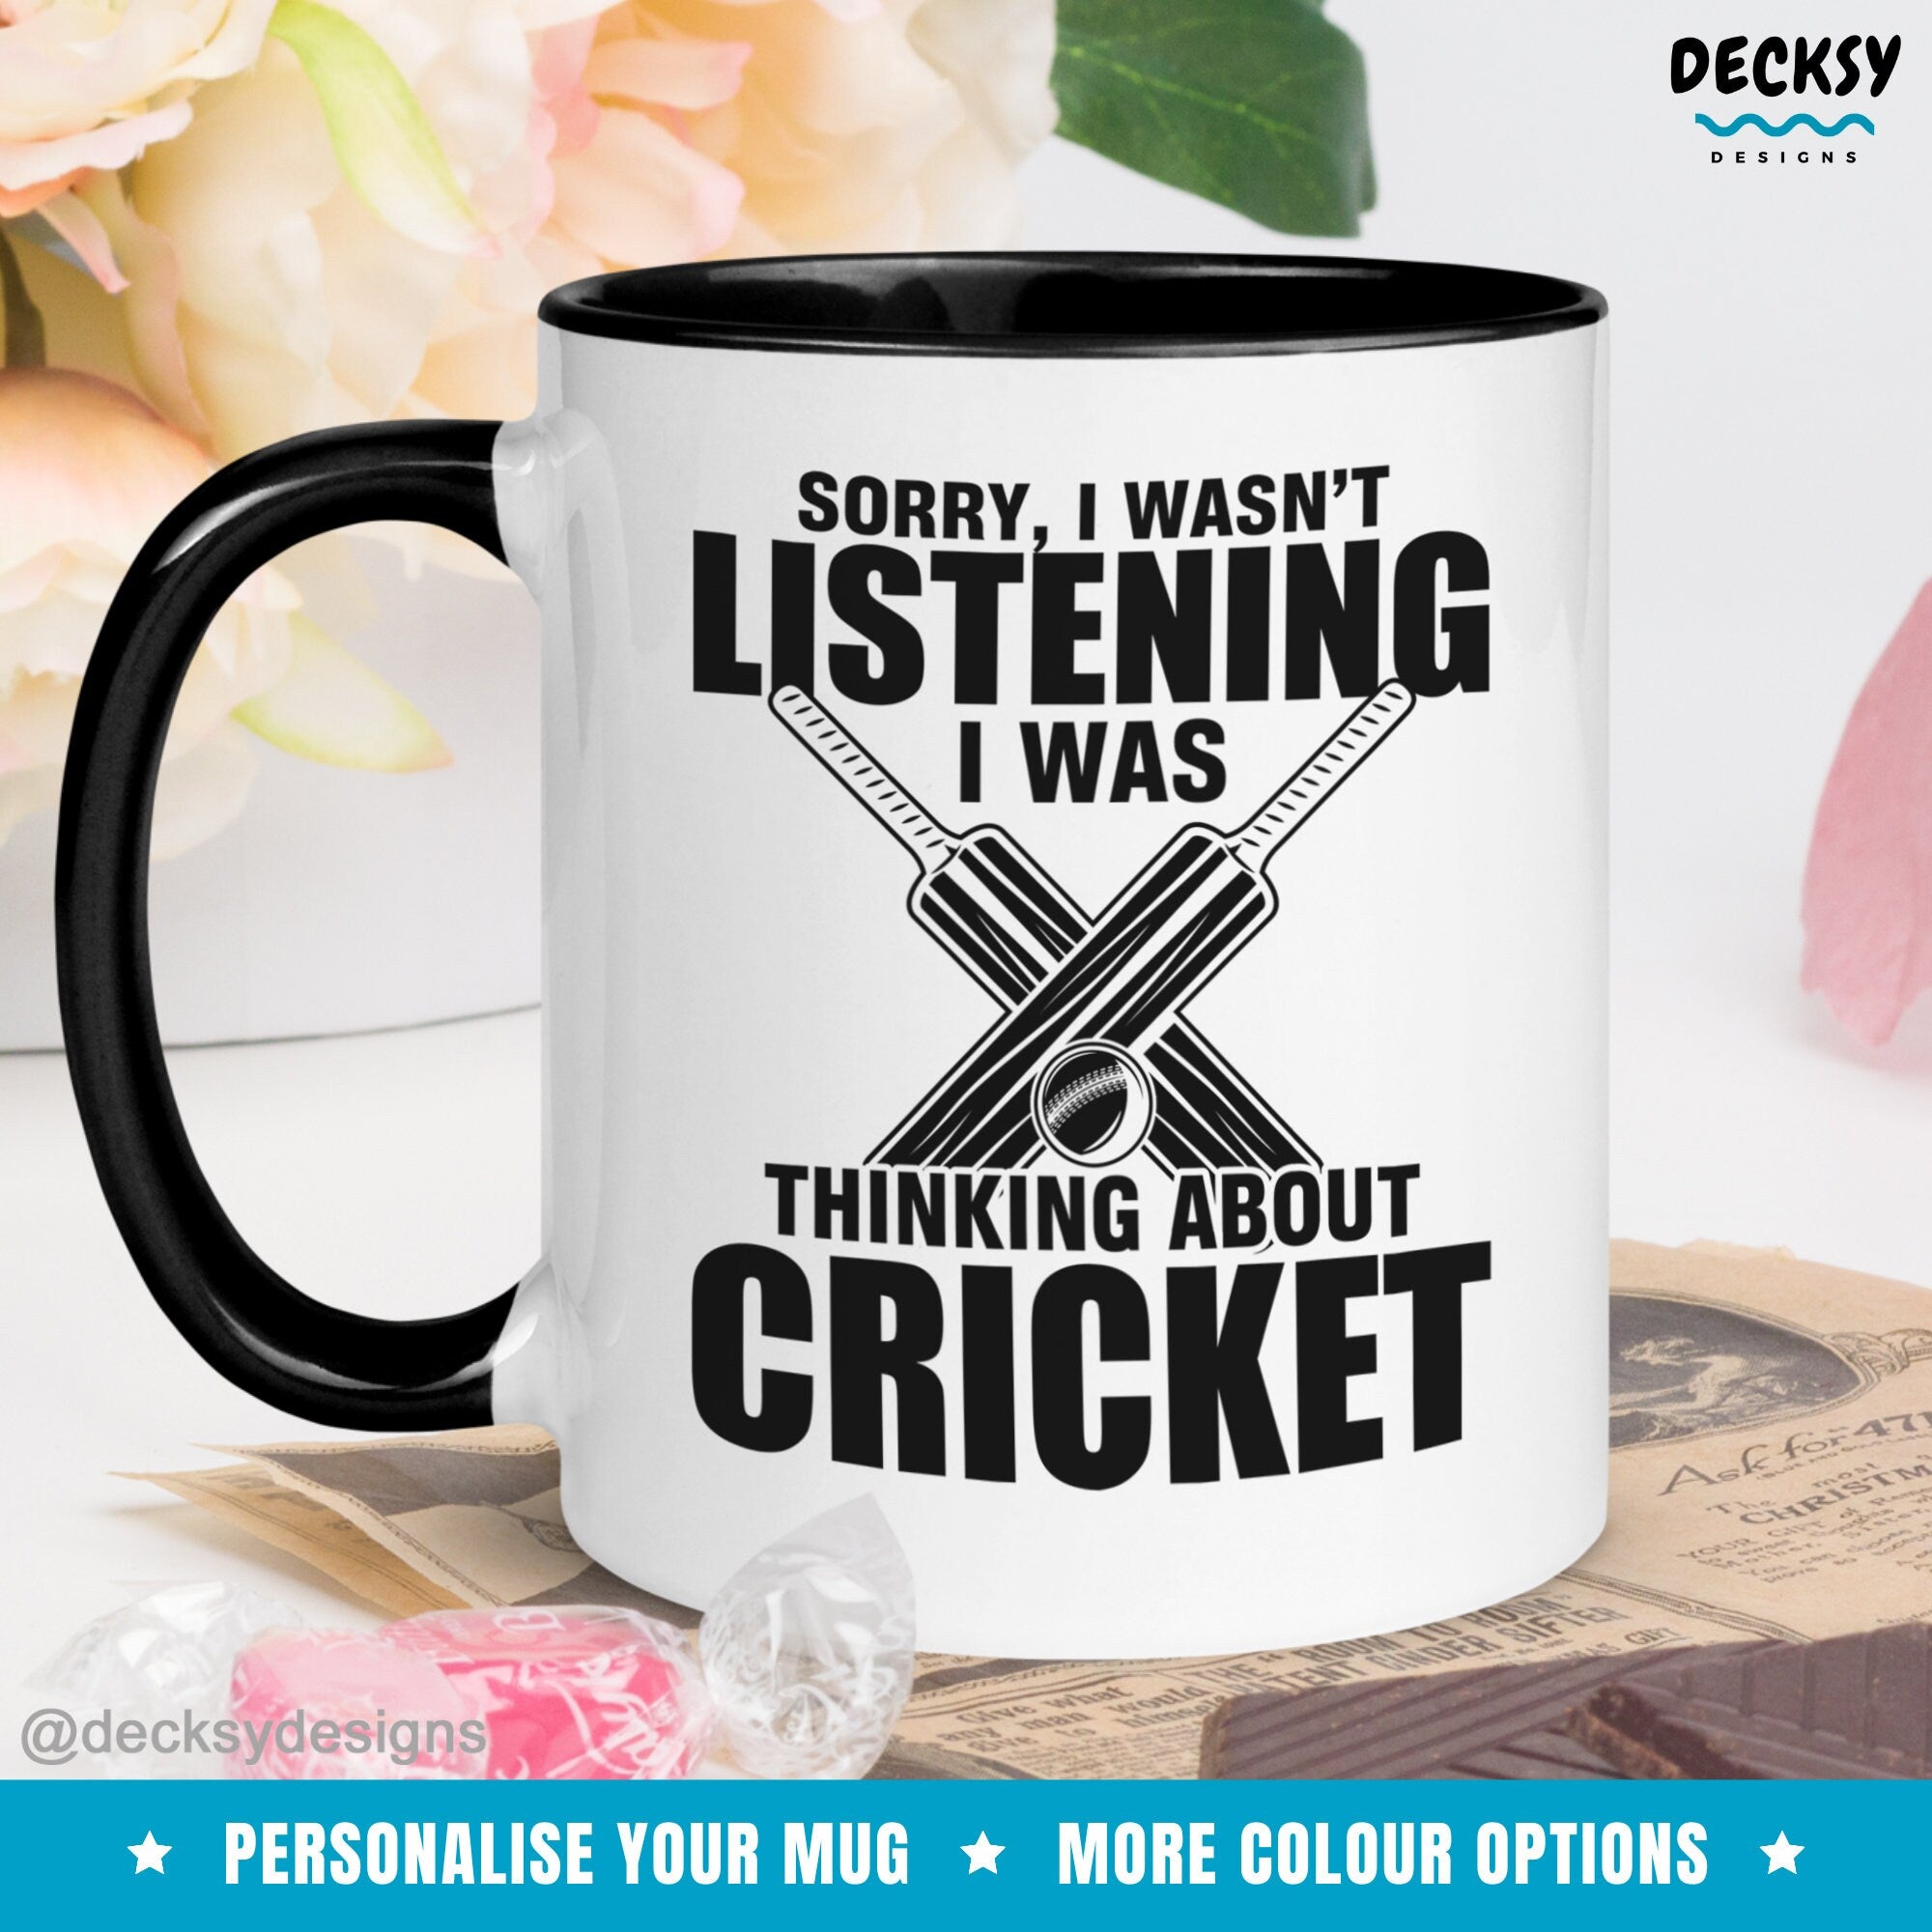 Custom Cricket Mug, Funny Gift For Cricketer, Cricket Fan Mug, Cricket Lover Gift Men, Cricket Player Gift, Personalised Cricket Gift Idea Mugs by DecksyDesigns